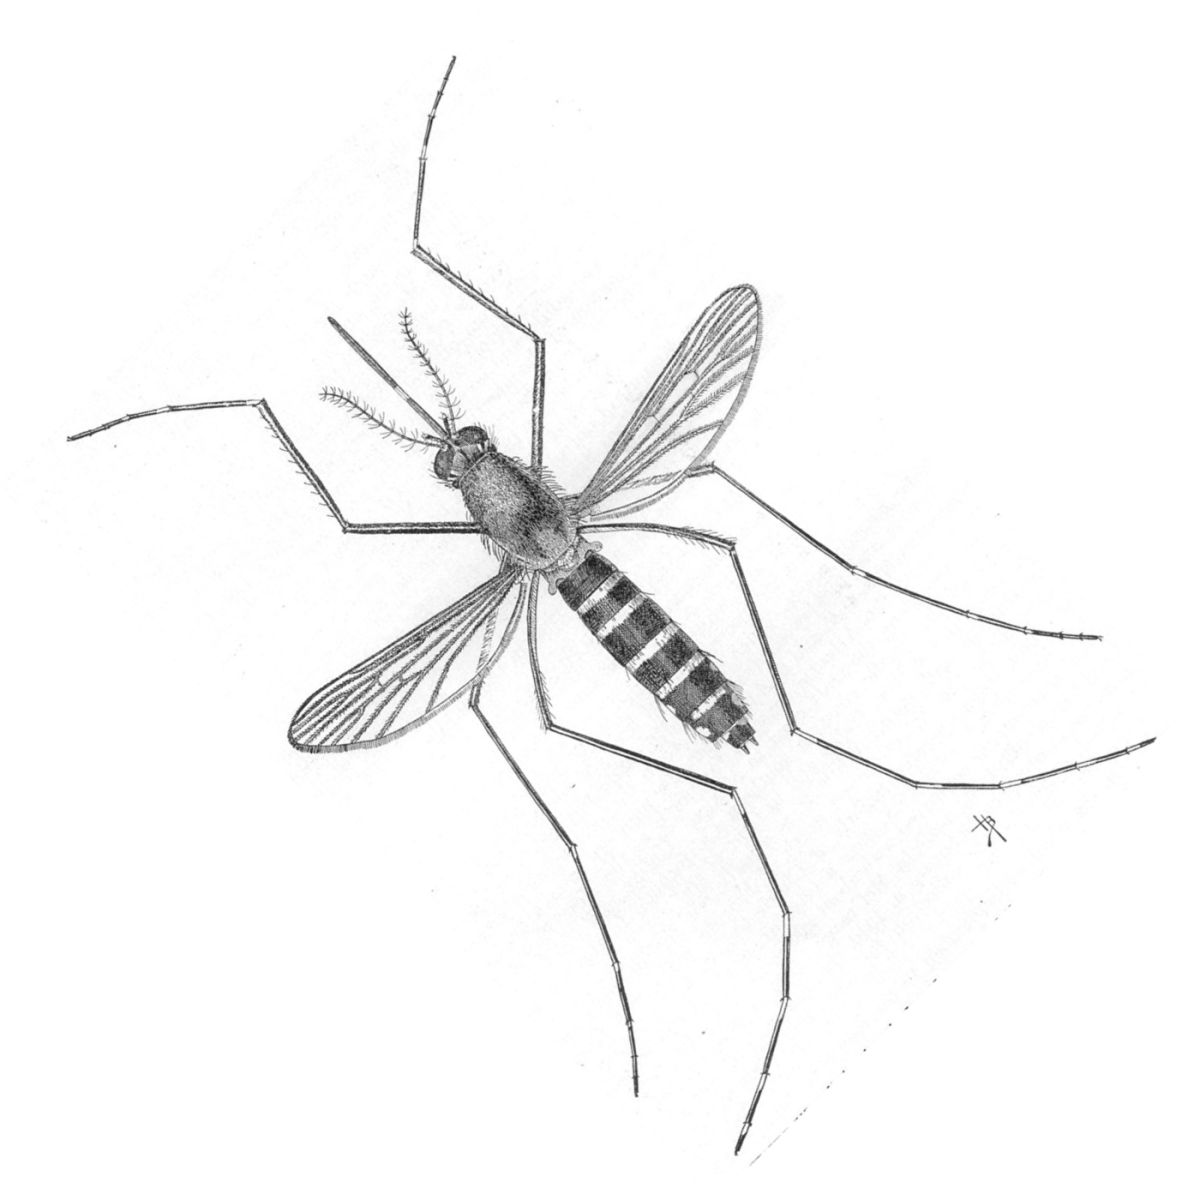 Mosquito bites can cause pain, irritation, itchiness, infection, and occasionally serious disease.